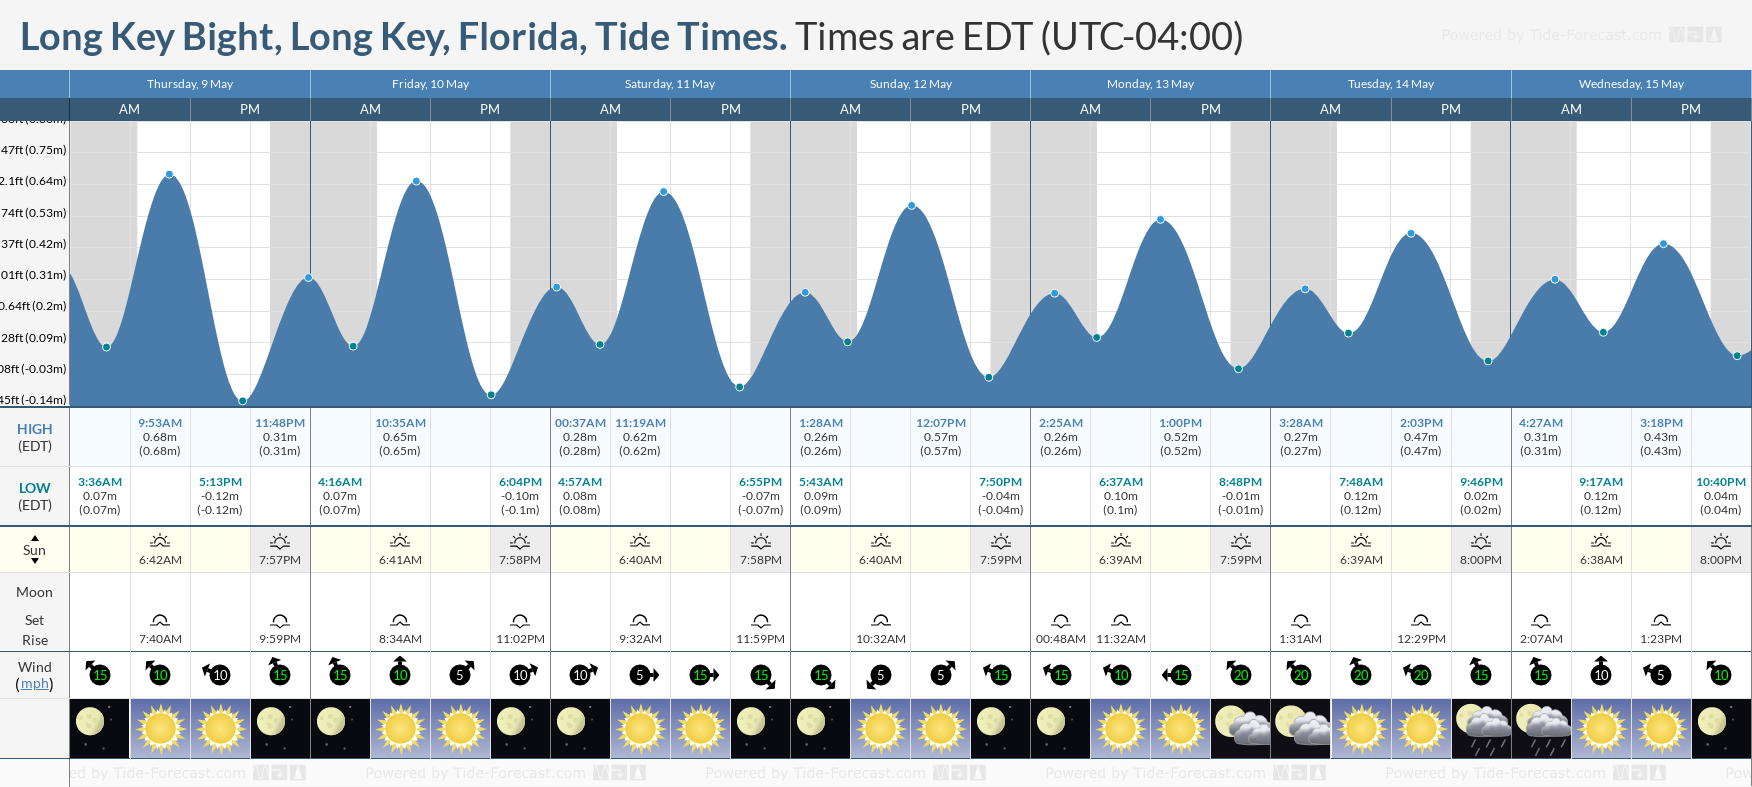 Long Key Bight, Long Key, Florida Tide Chart including high and low tide tide times for the next 7 days